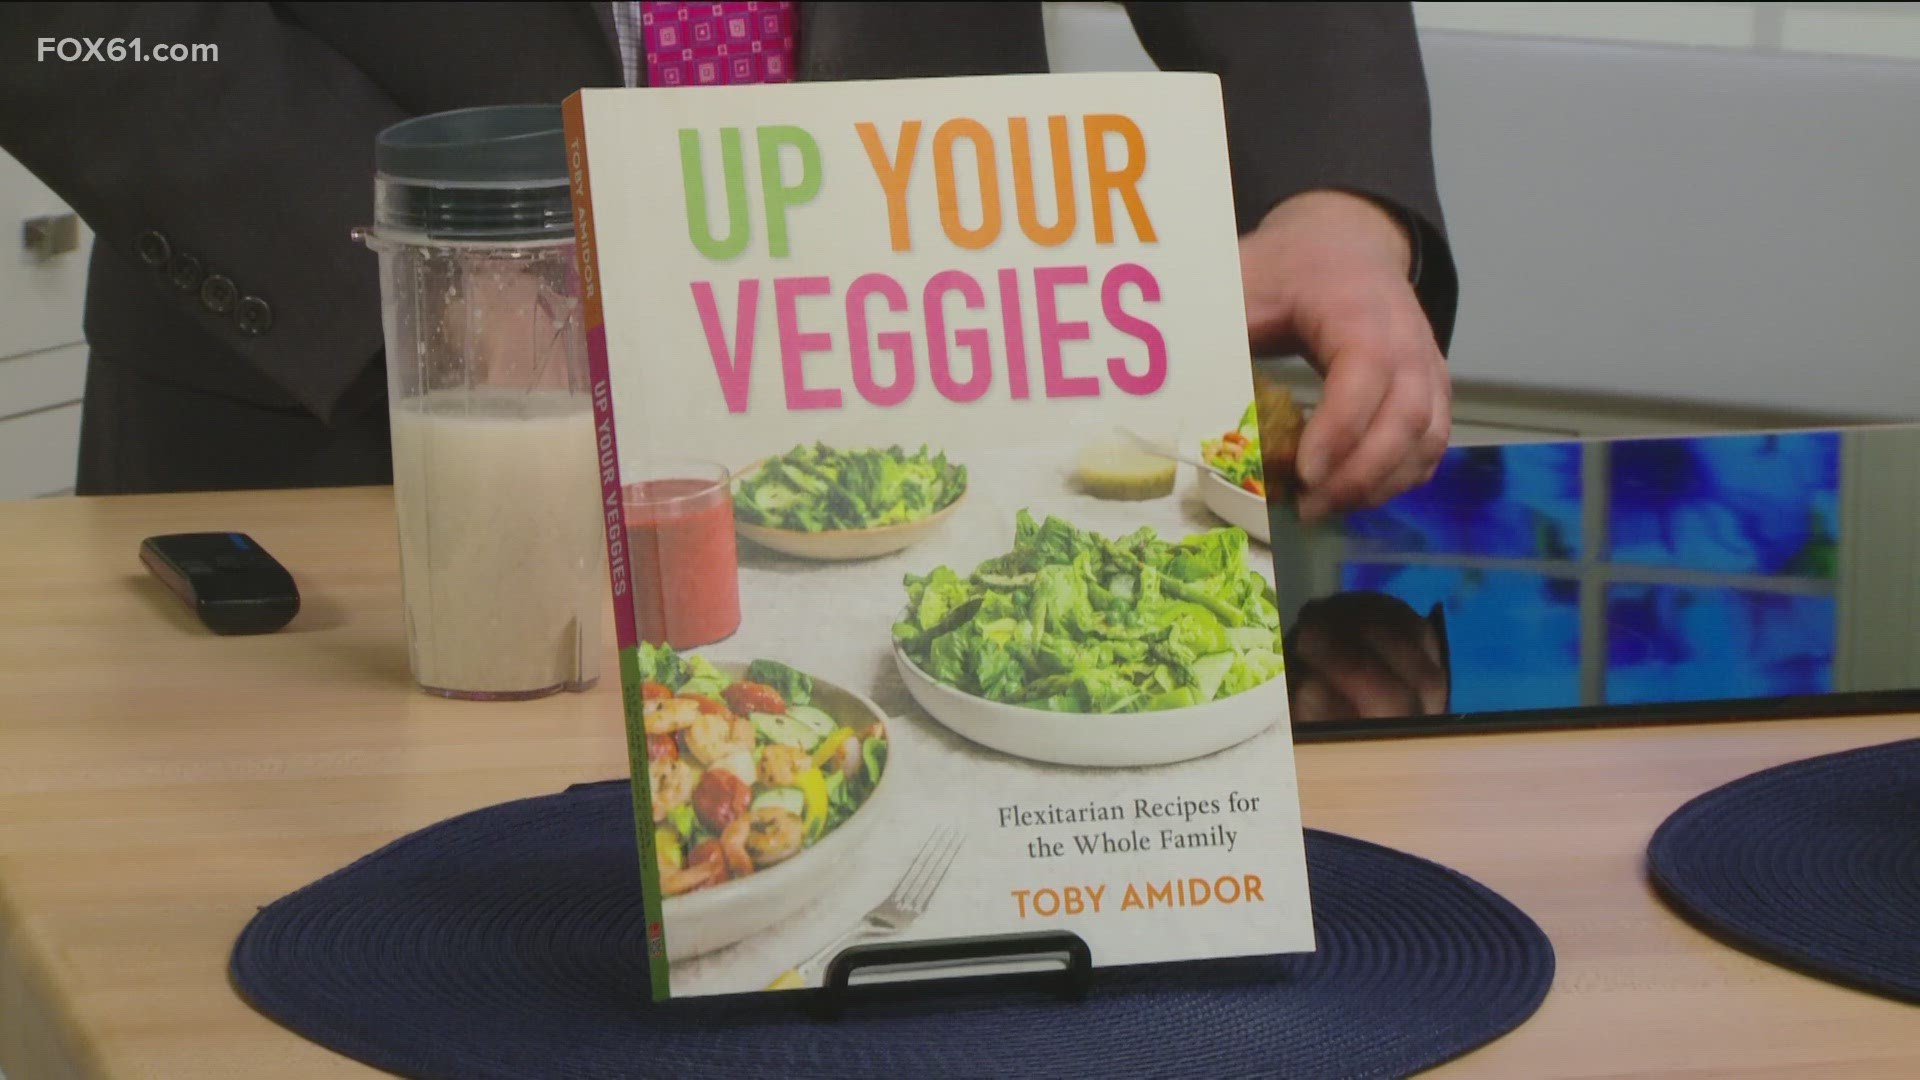 Chef Toby Amidor shares recipes that the whole family will love and to increase veggies in their diets.